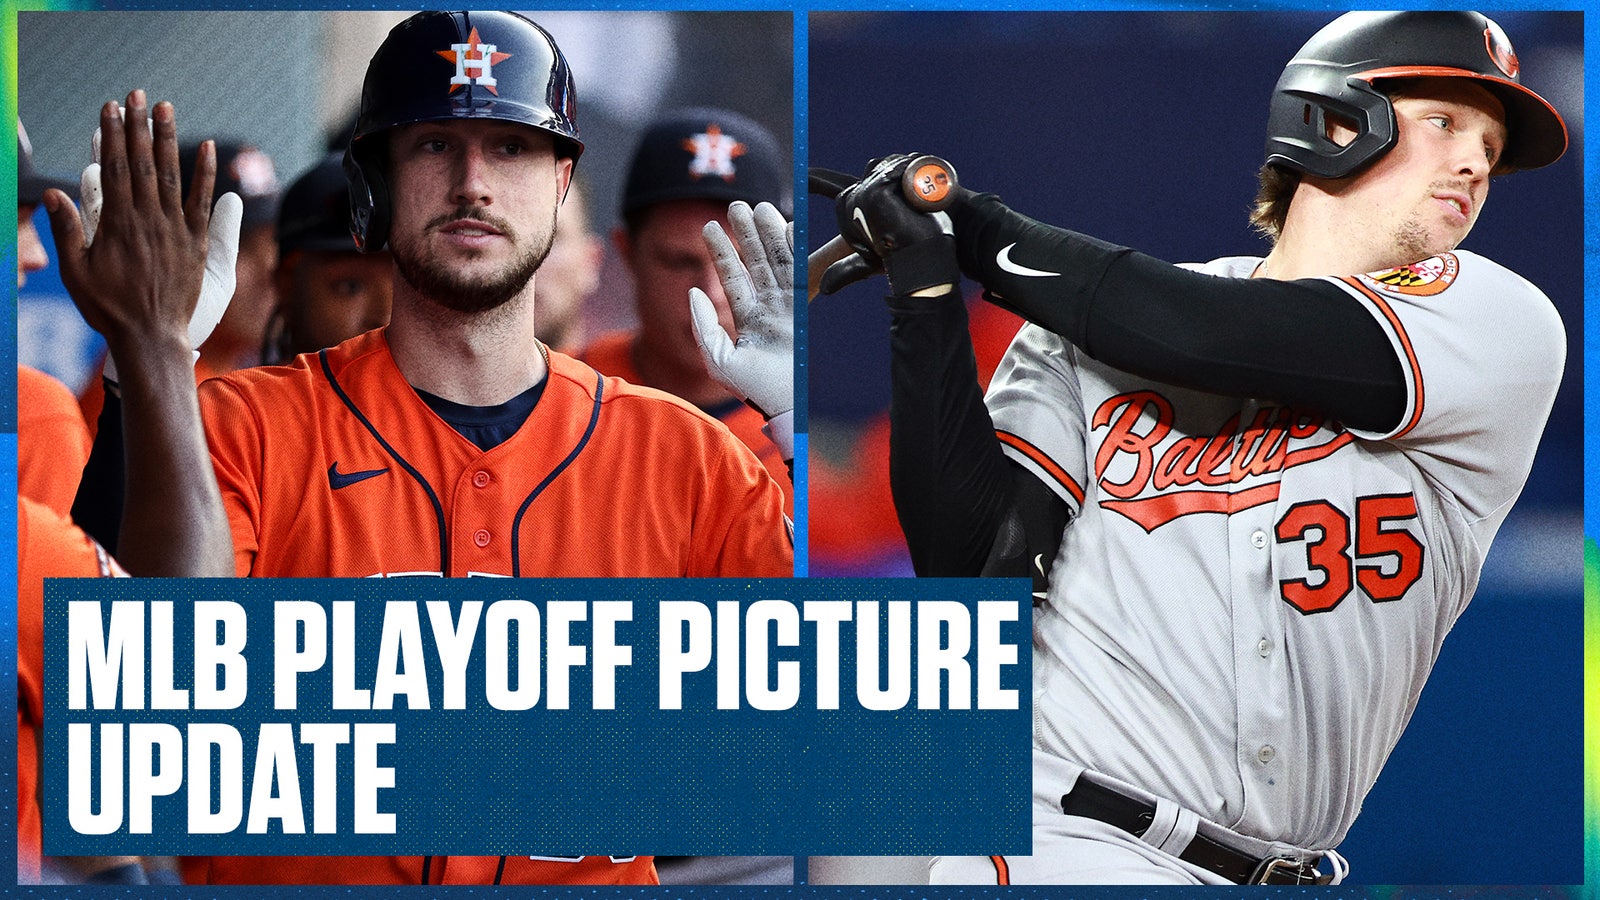 MLB Playoff Picture Update: Will the Orioles hold on? Astros the team to beat?